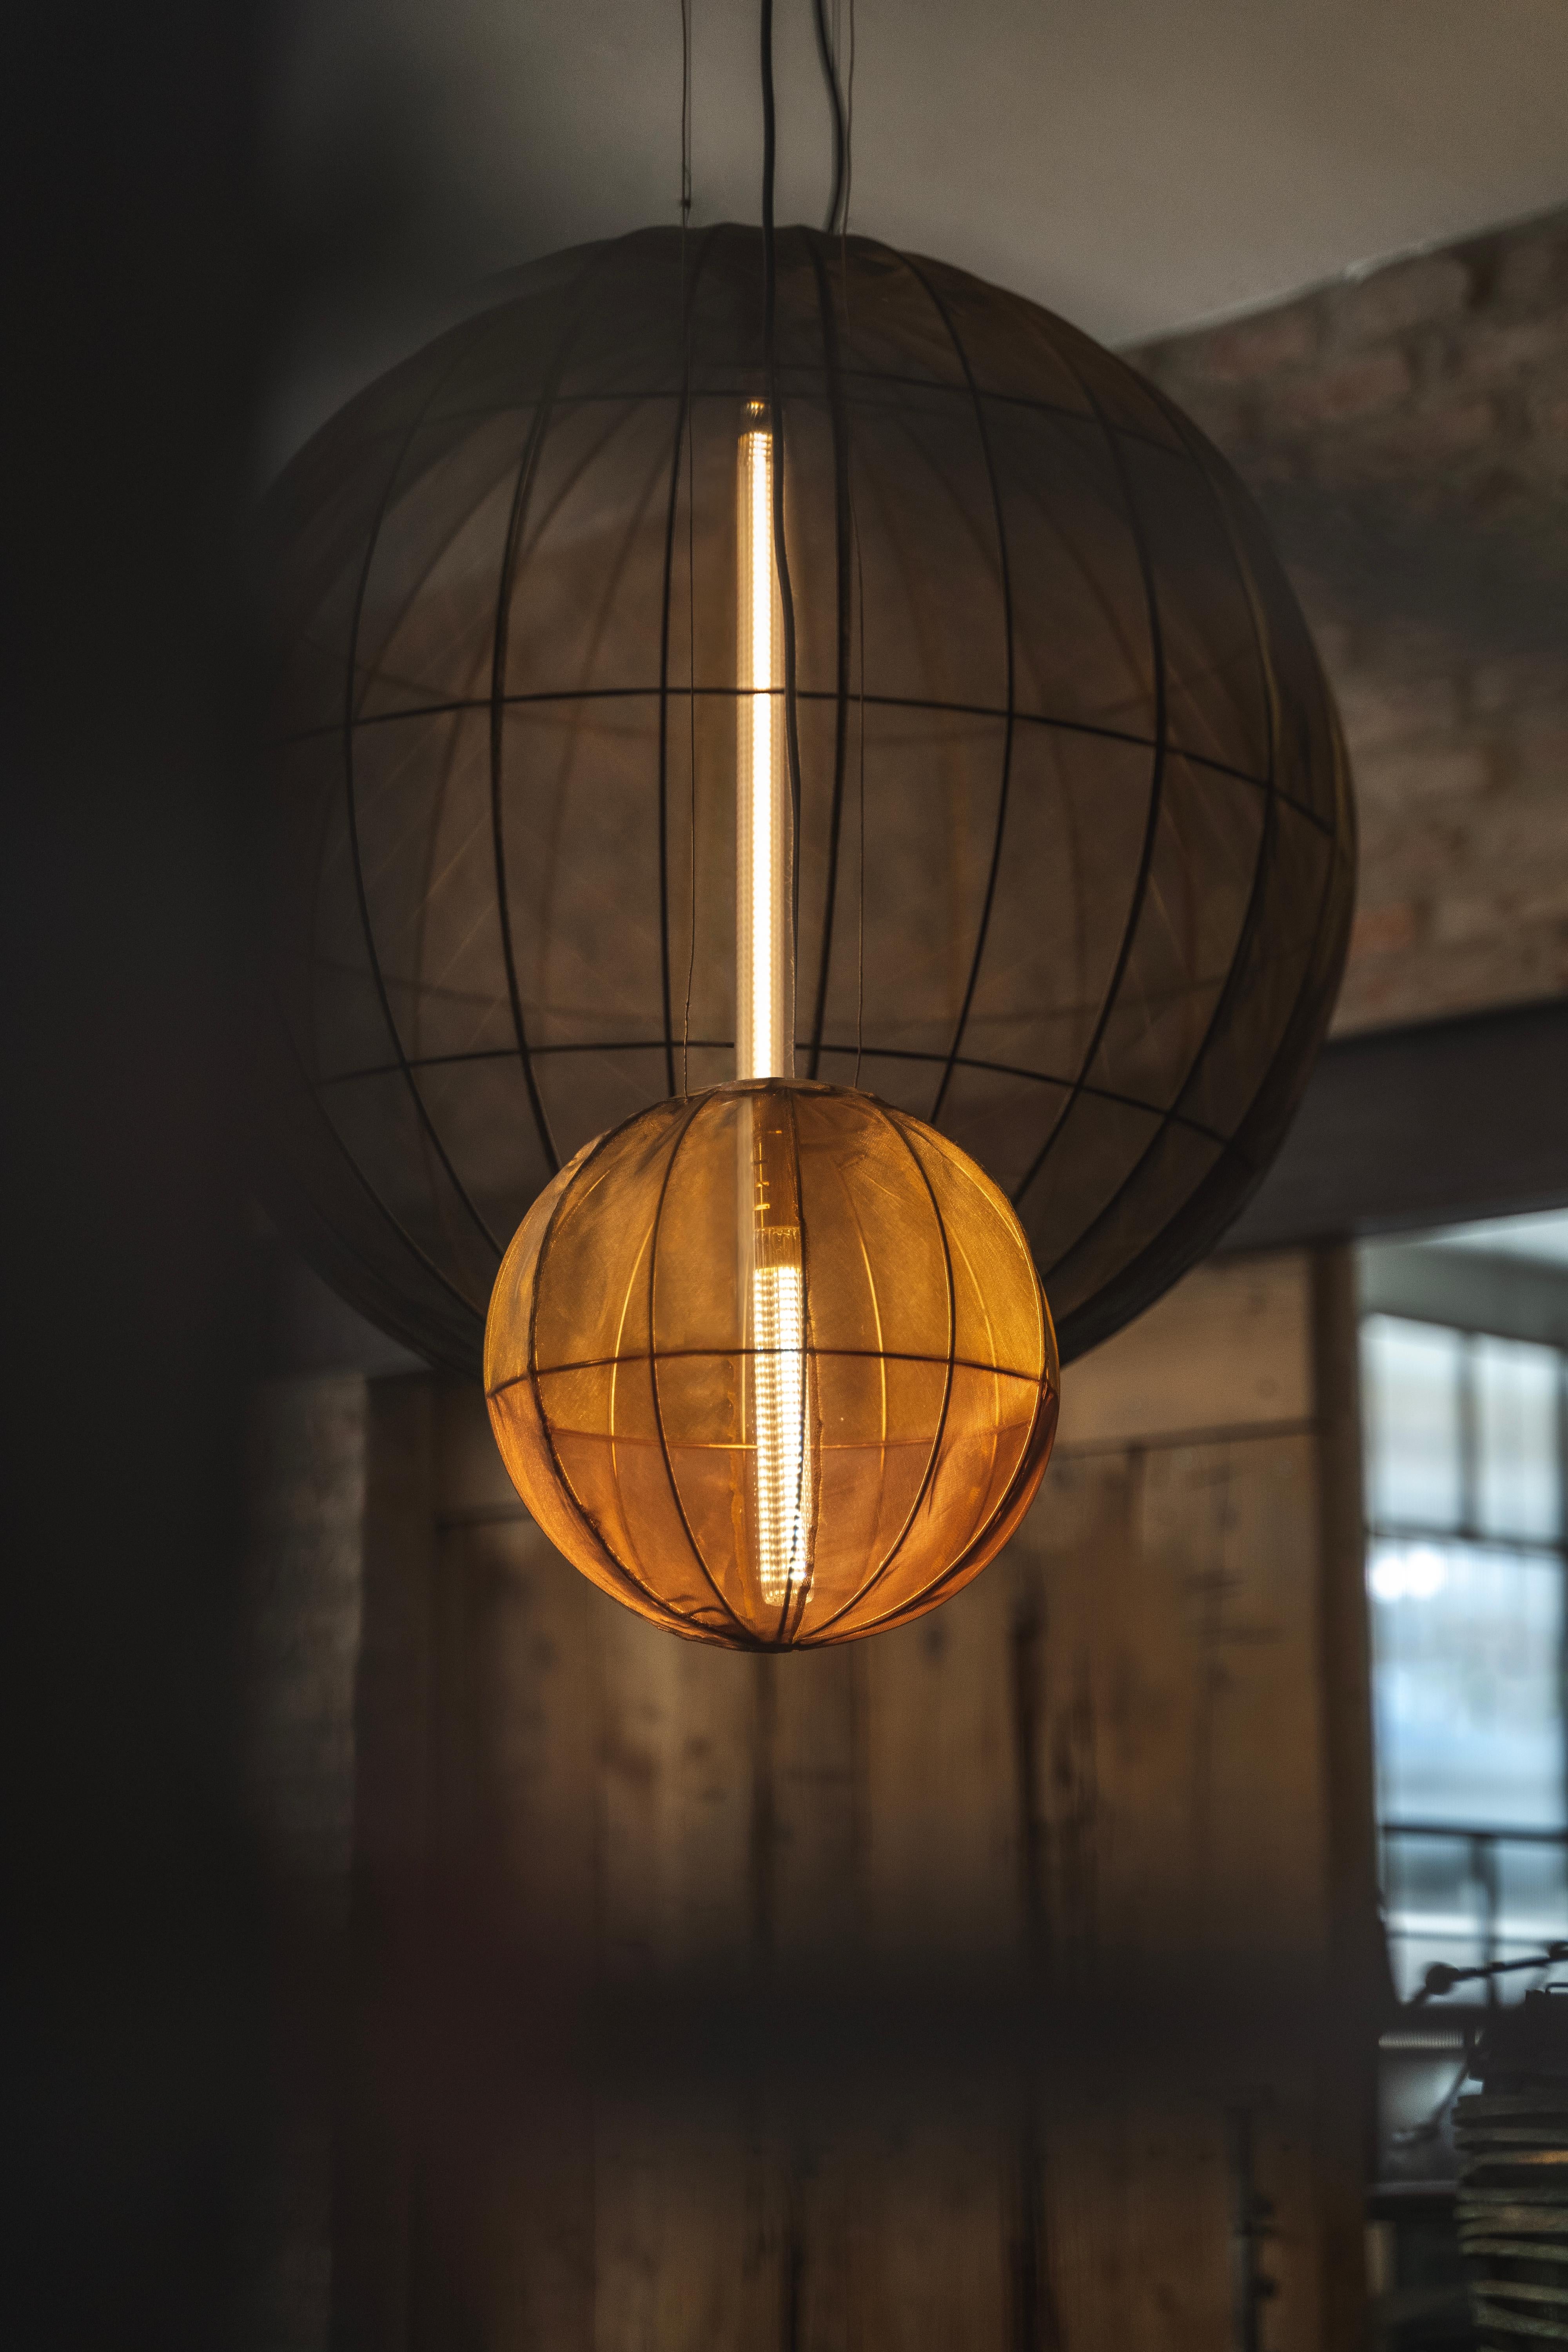 The Oxygen Spheres are a collection of light and graceful suspension lamps.Their structure is carefully wrapped with a metallic fabric, a work of high craftmanship.
These lamps are extremely light even in their largest versions and are therefore